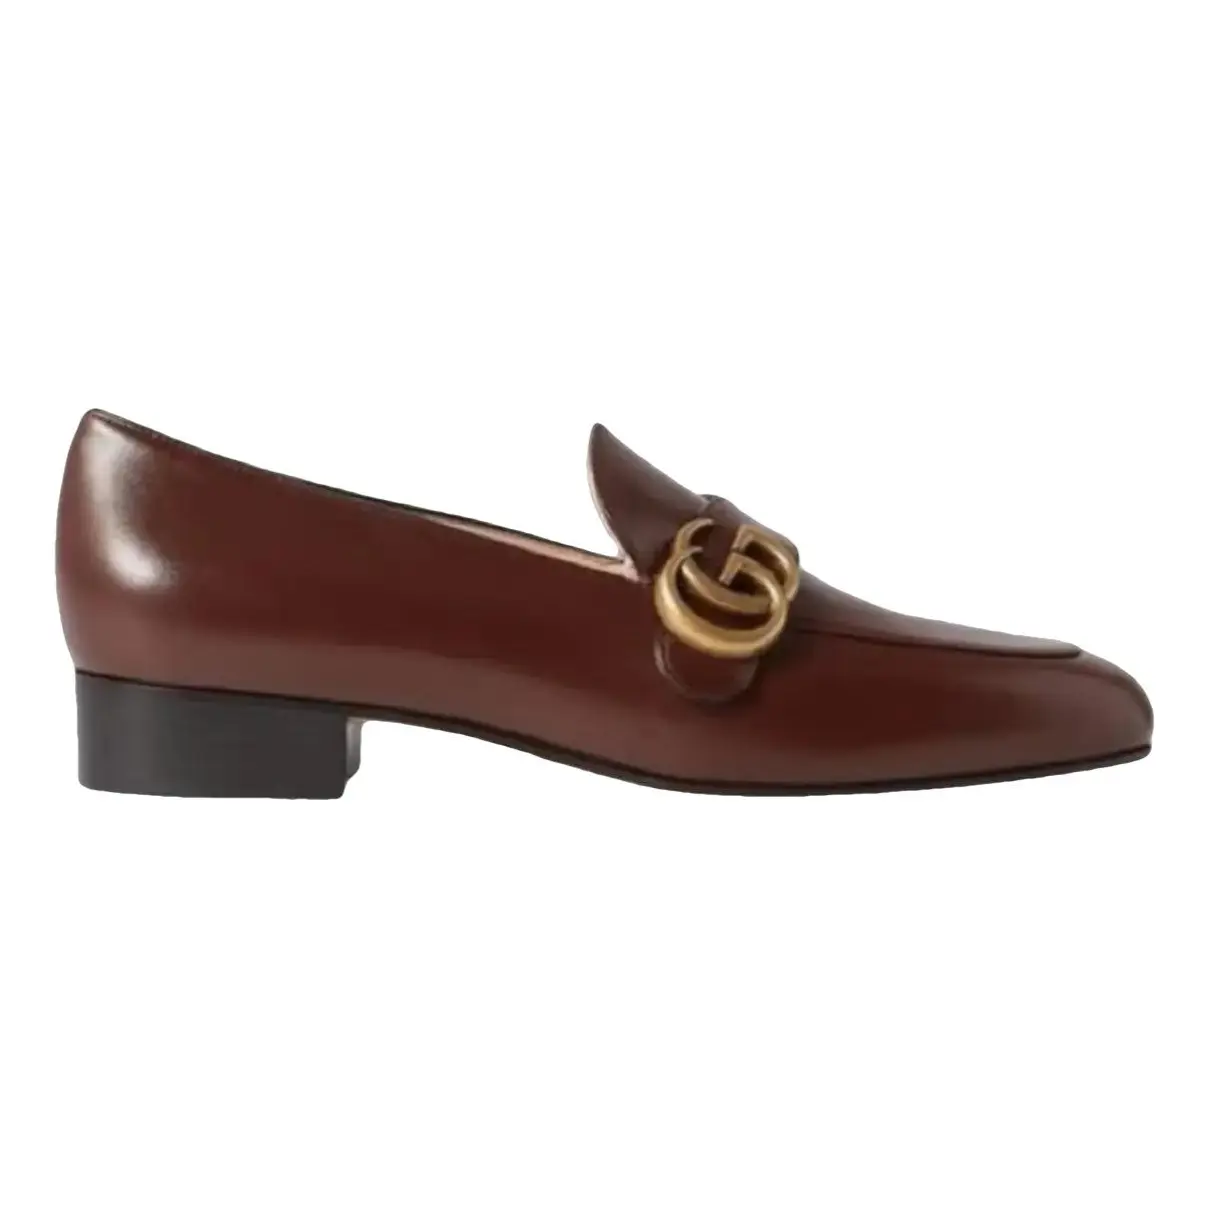 Marmont leather flats